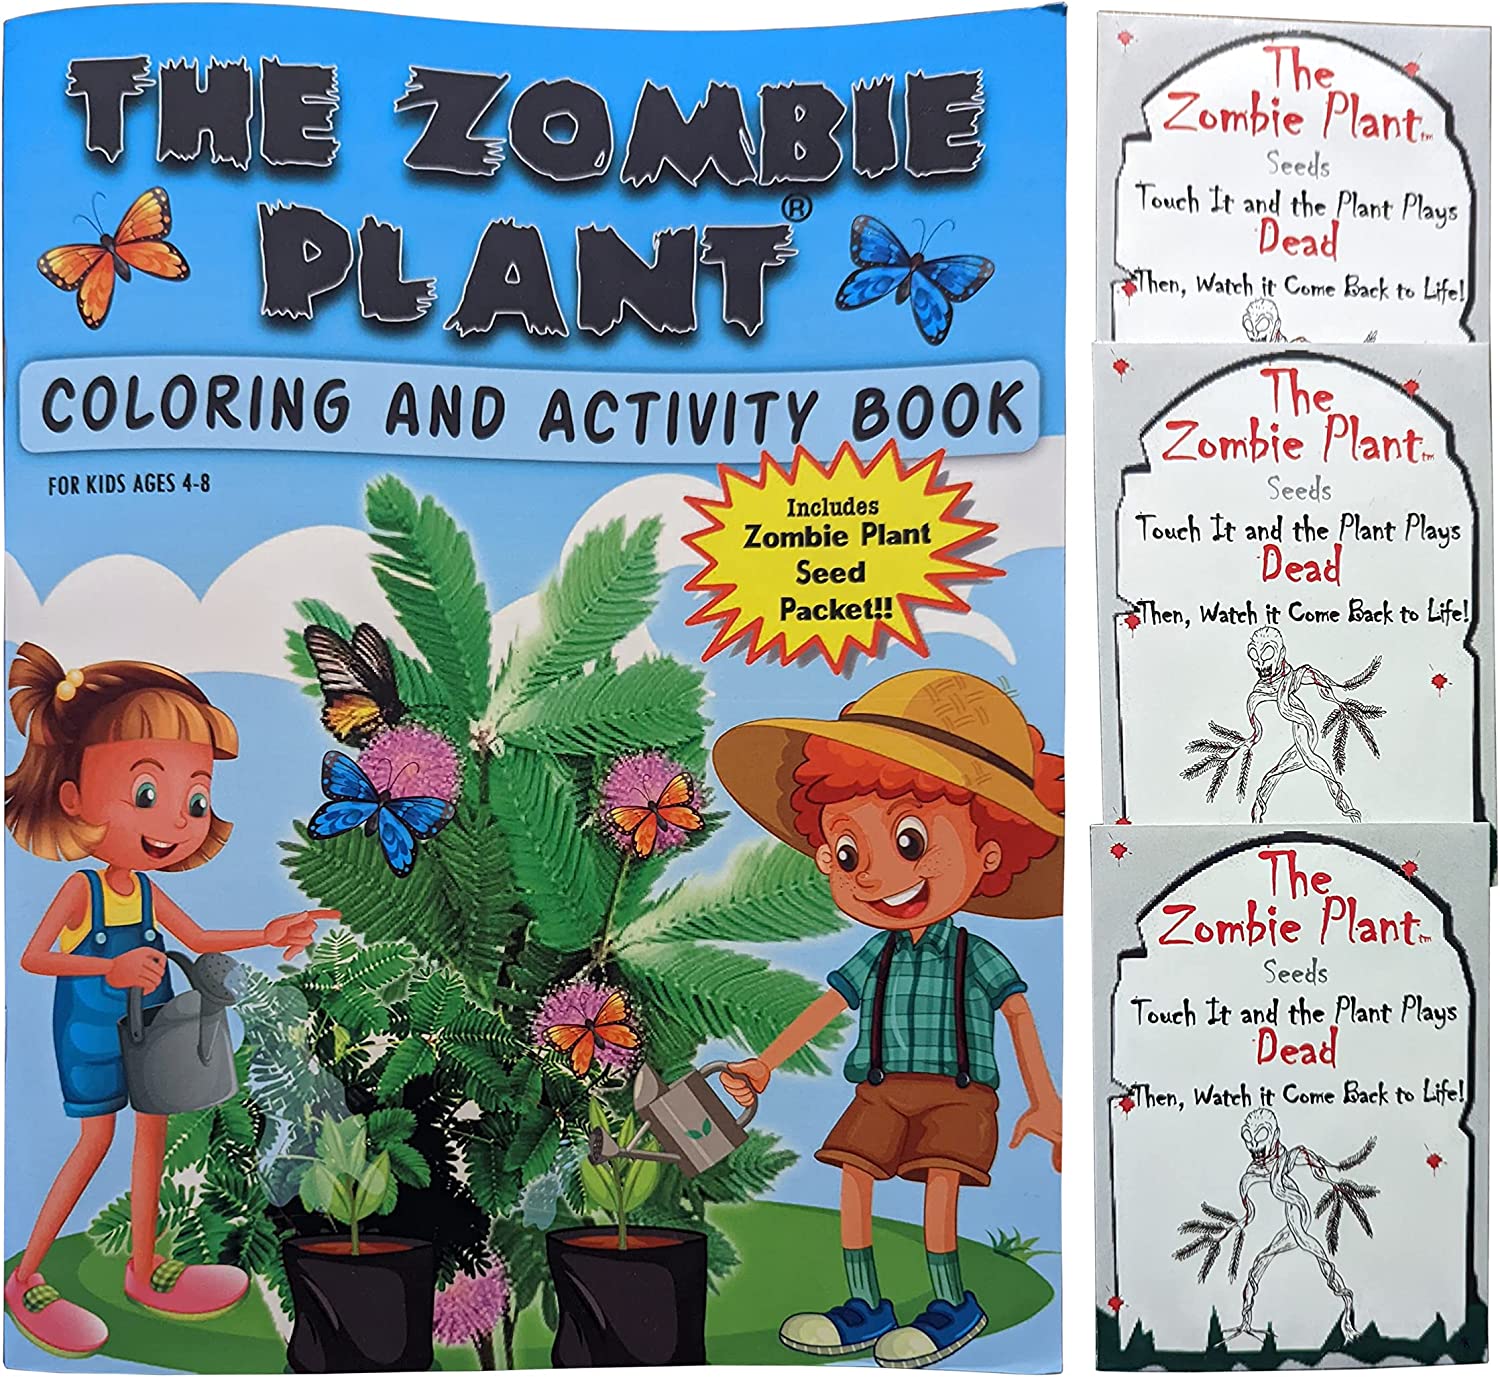 The Zombie Plant by TickleMe Plant